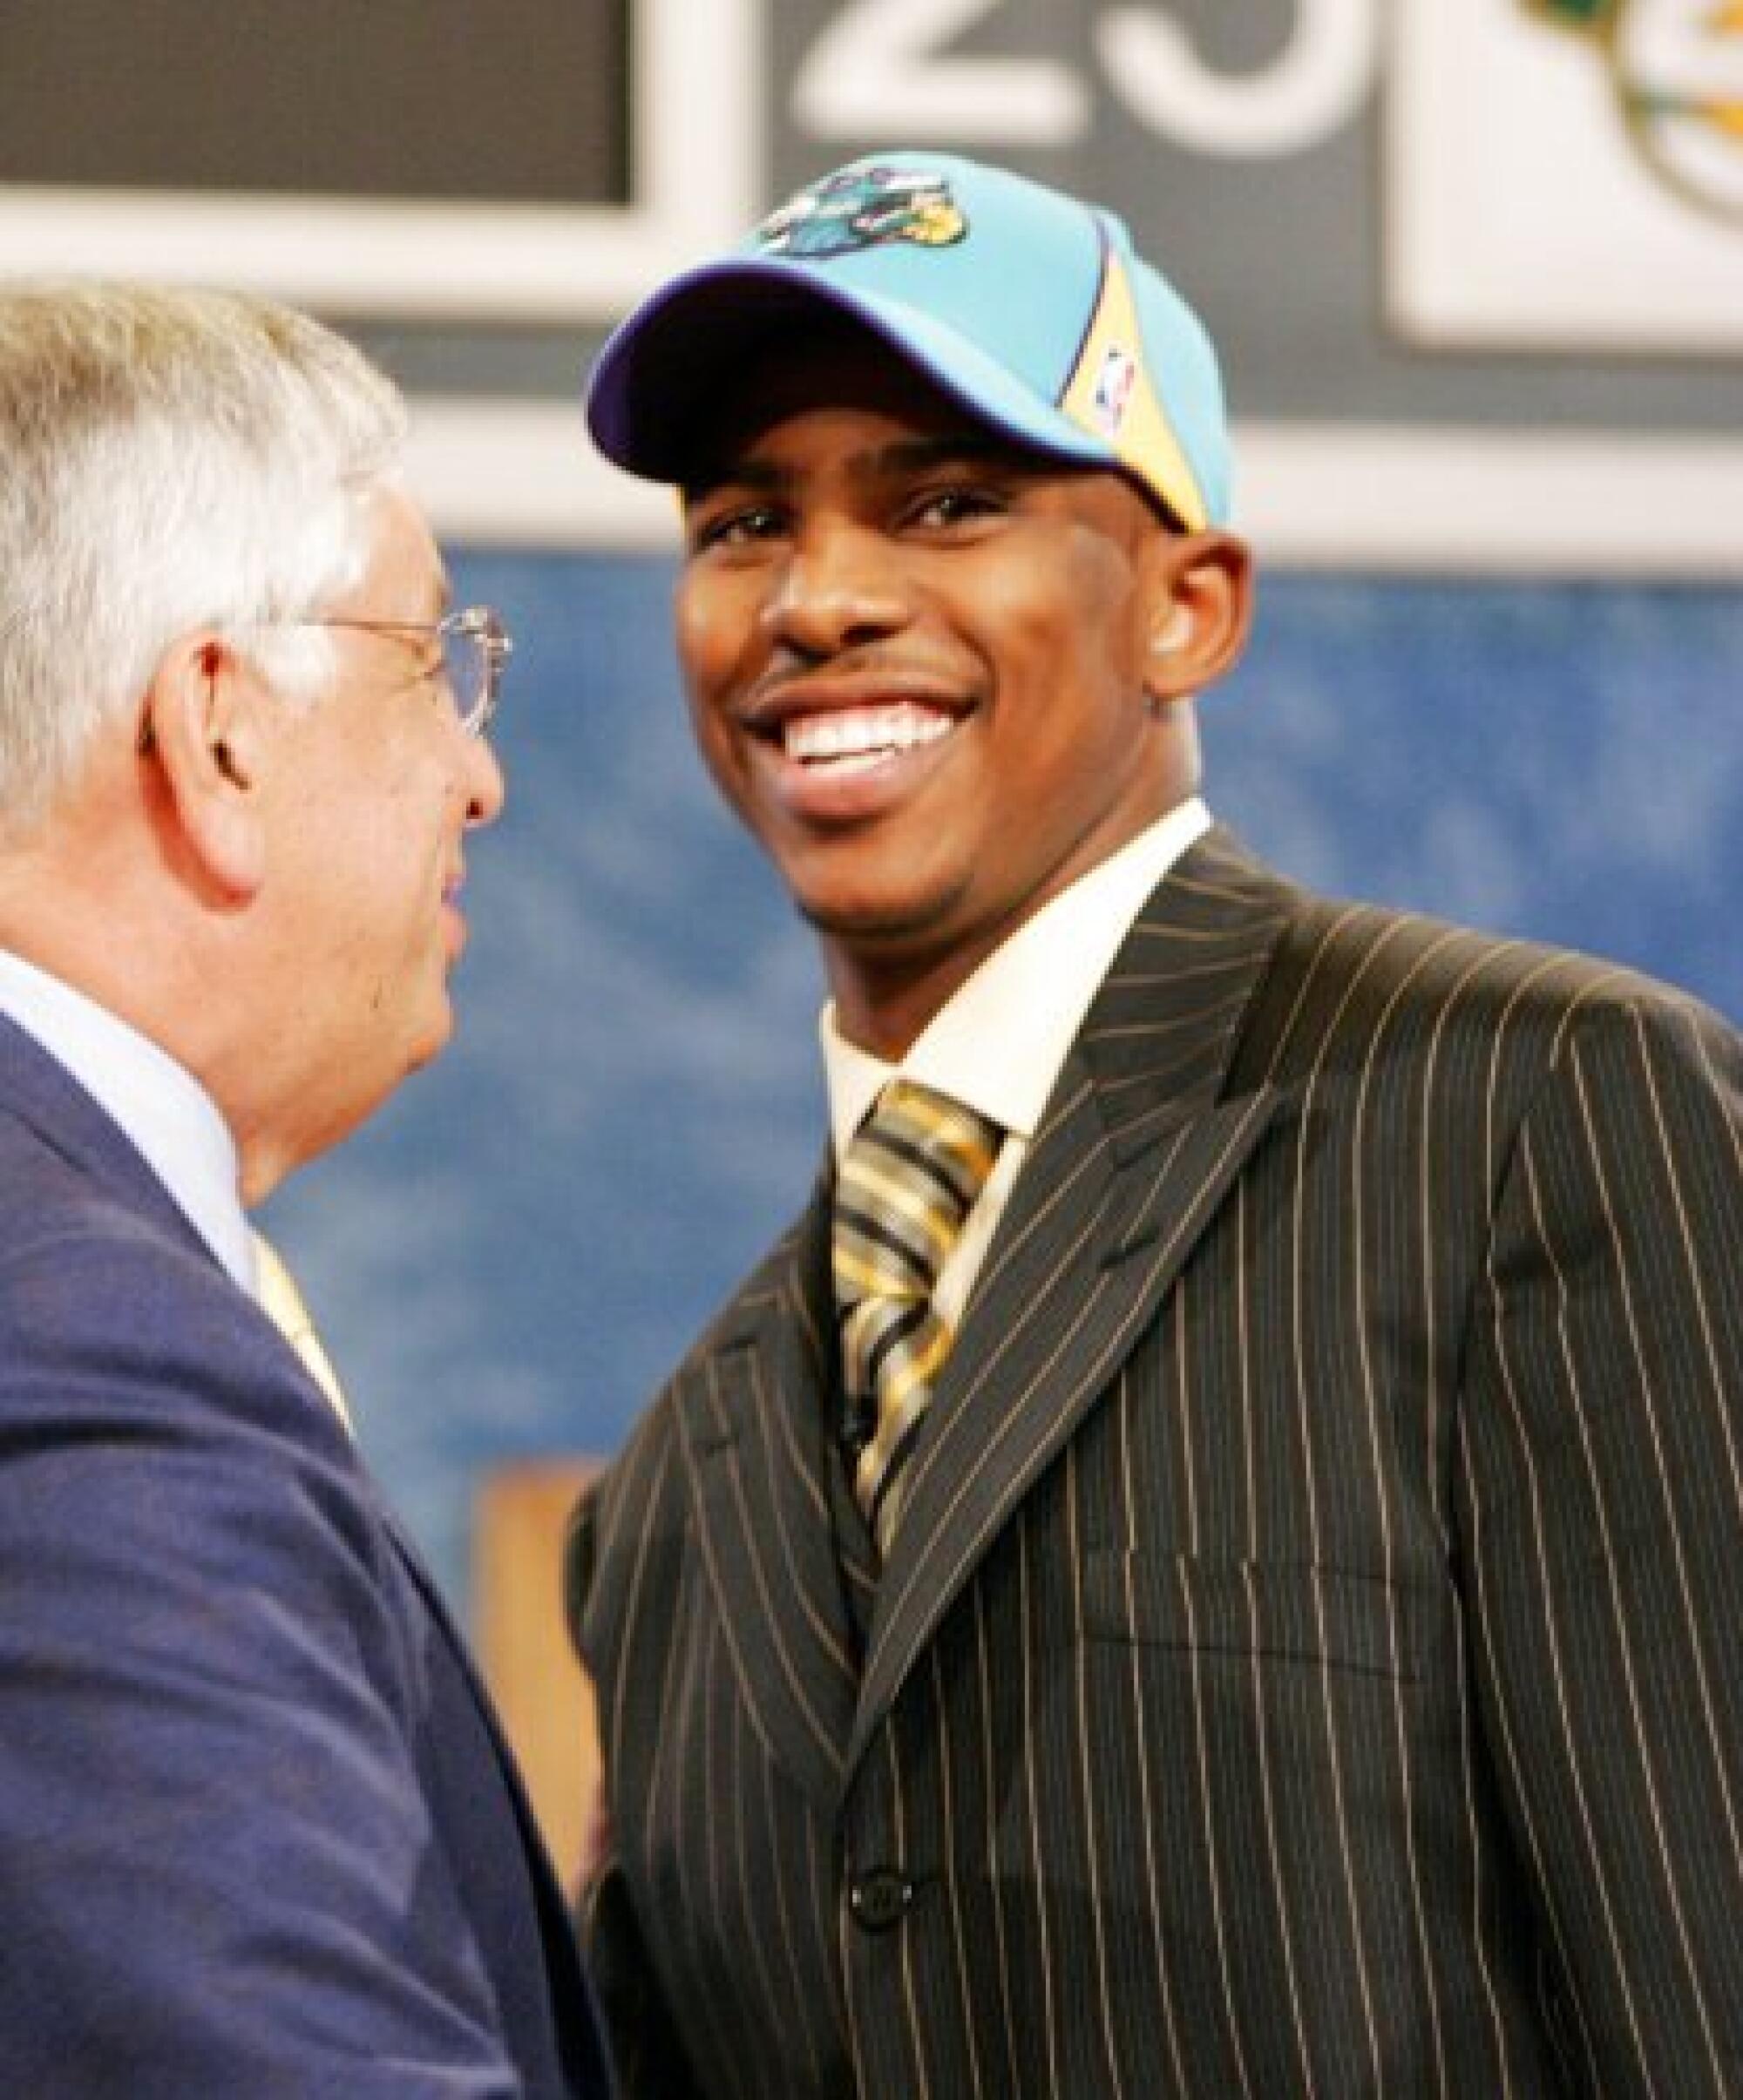 Chris Paul is congratulated by commissioner David Stern after he was selected in the first round of the 2005 NBA draft.